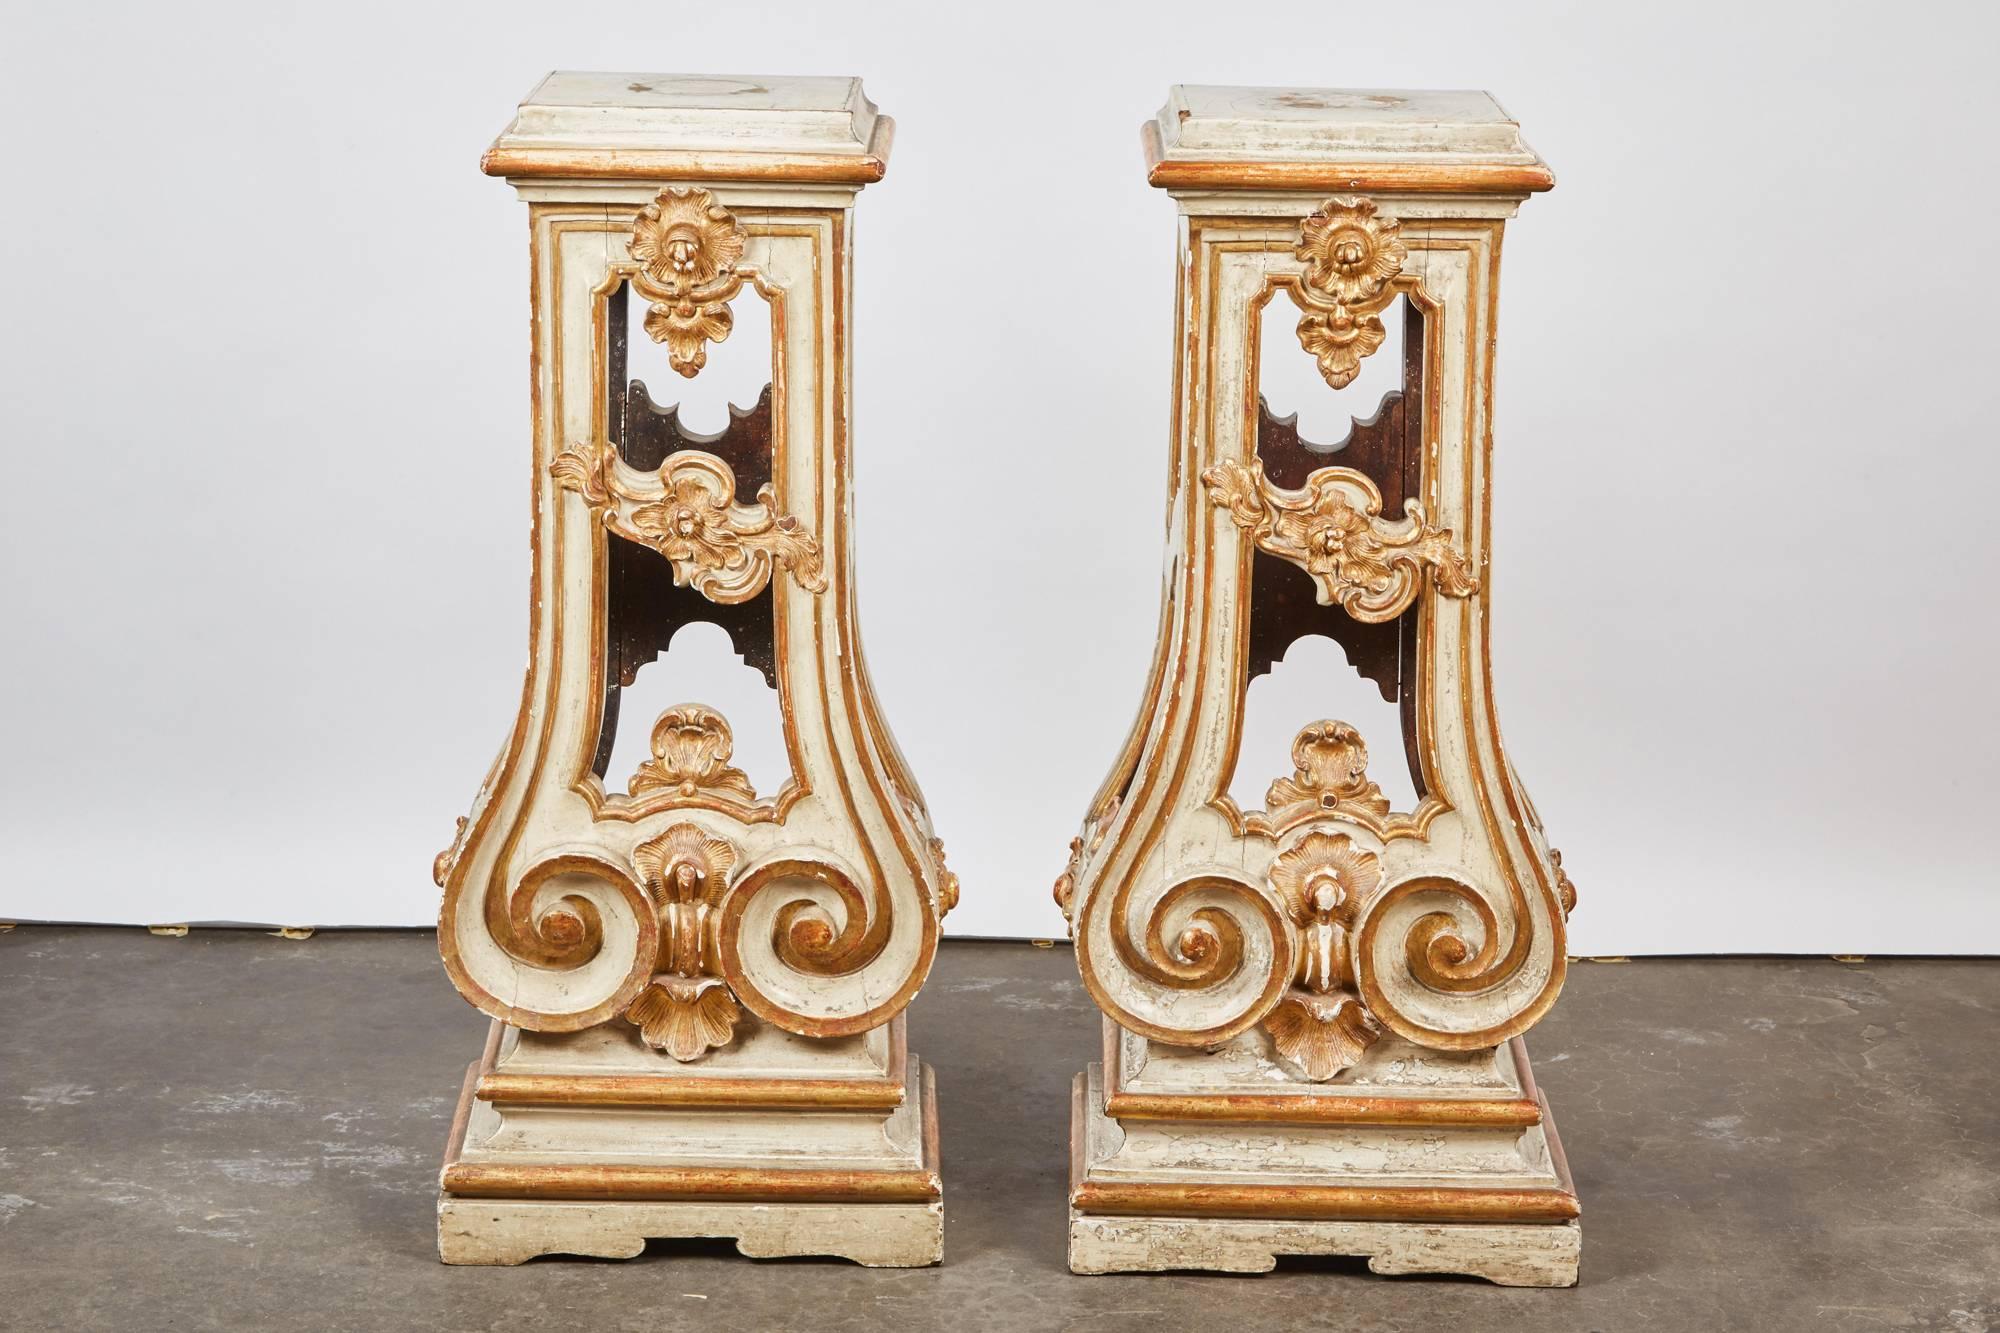 Each of these Italian, 18th century Rococo cream painted and parcel-gilt pedestal stand has a square top over a molded and gilt rim over a rectangular open section with scrolls and rocaille and gilt edges; the lower front section has whorls. Each